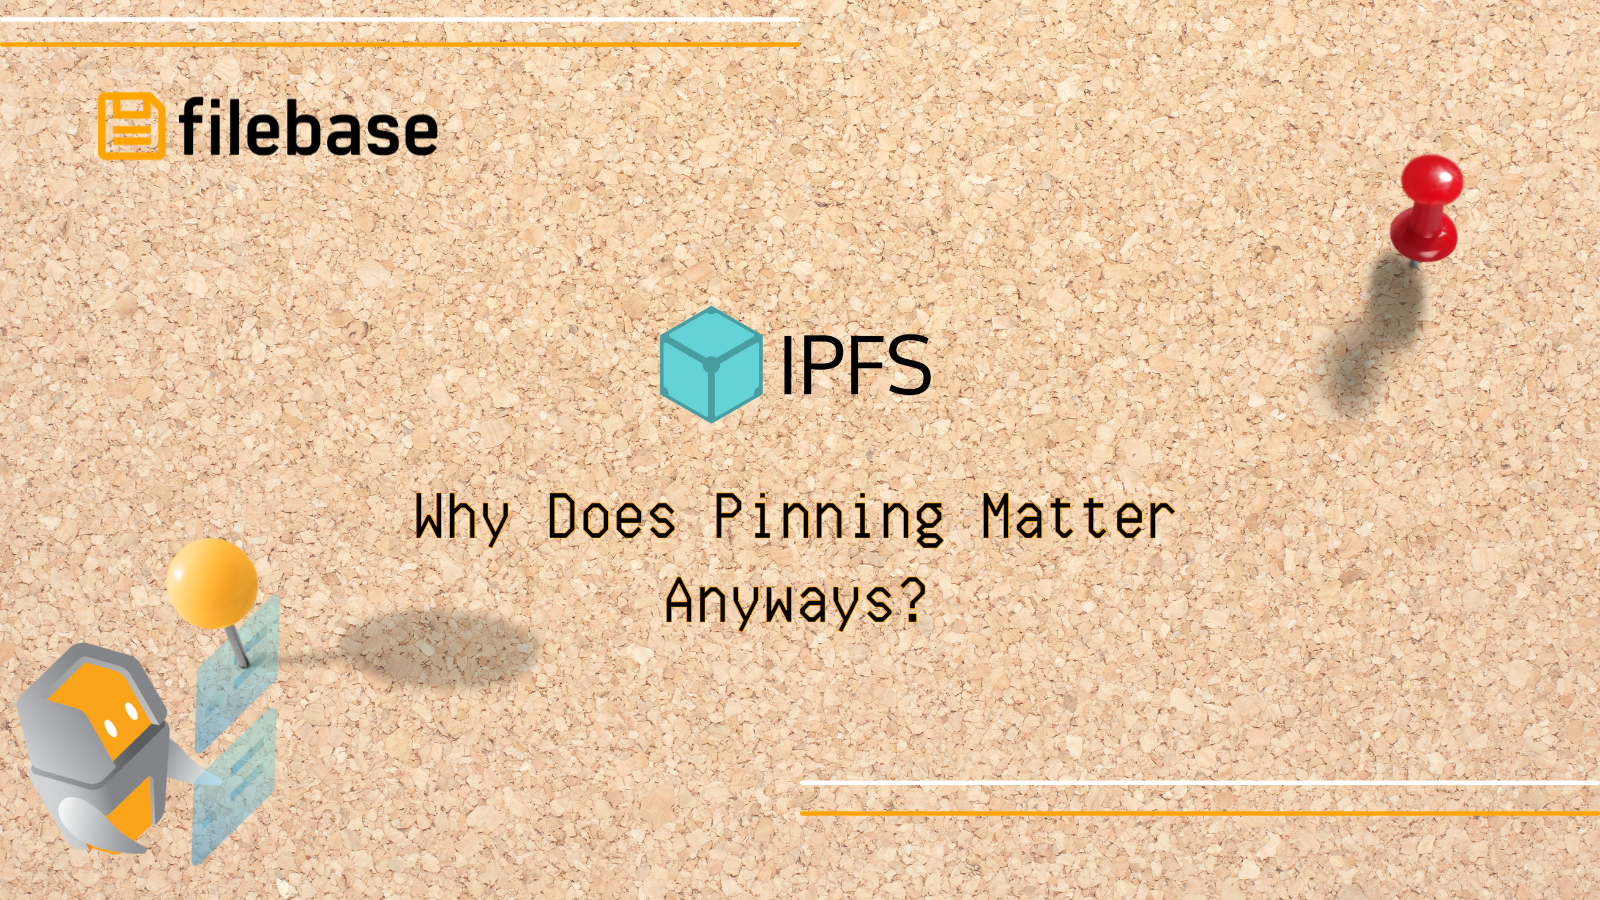 IPFS: Why Does Pinning Matter, Anyways?